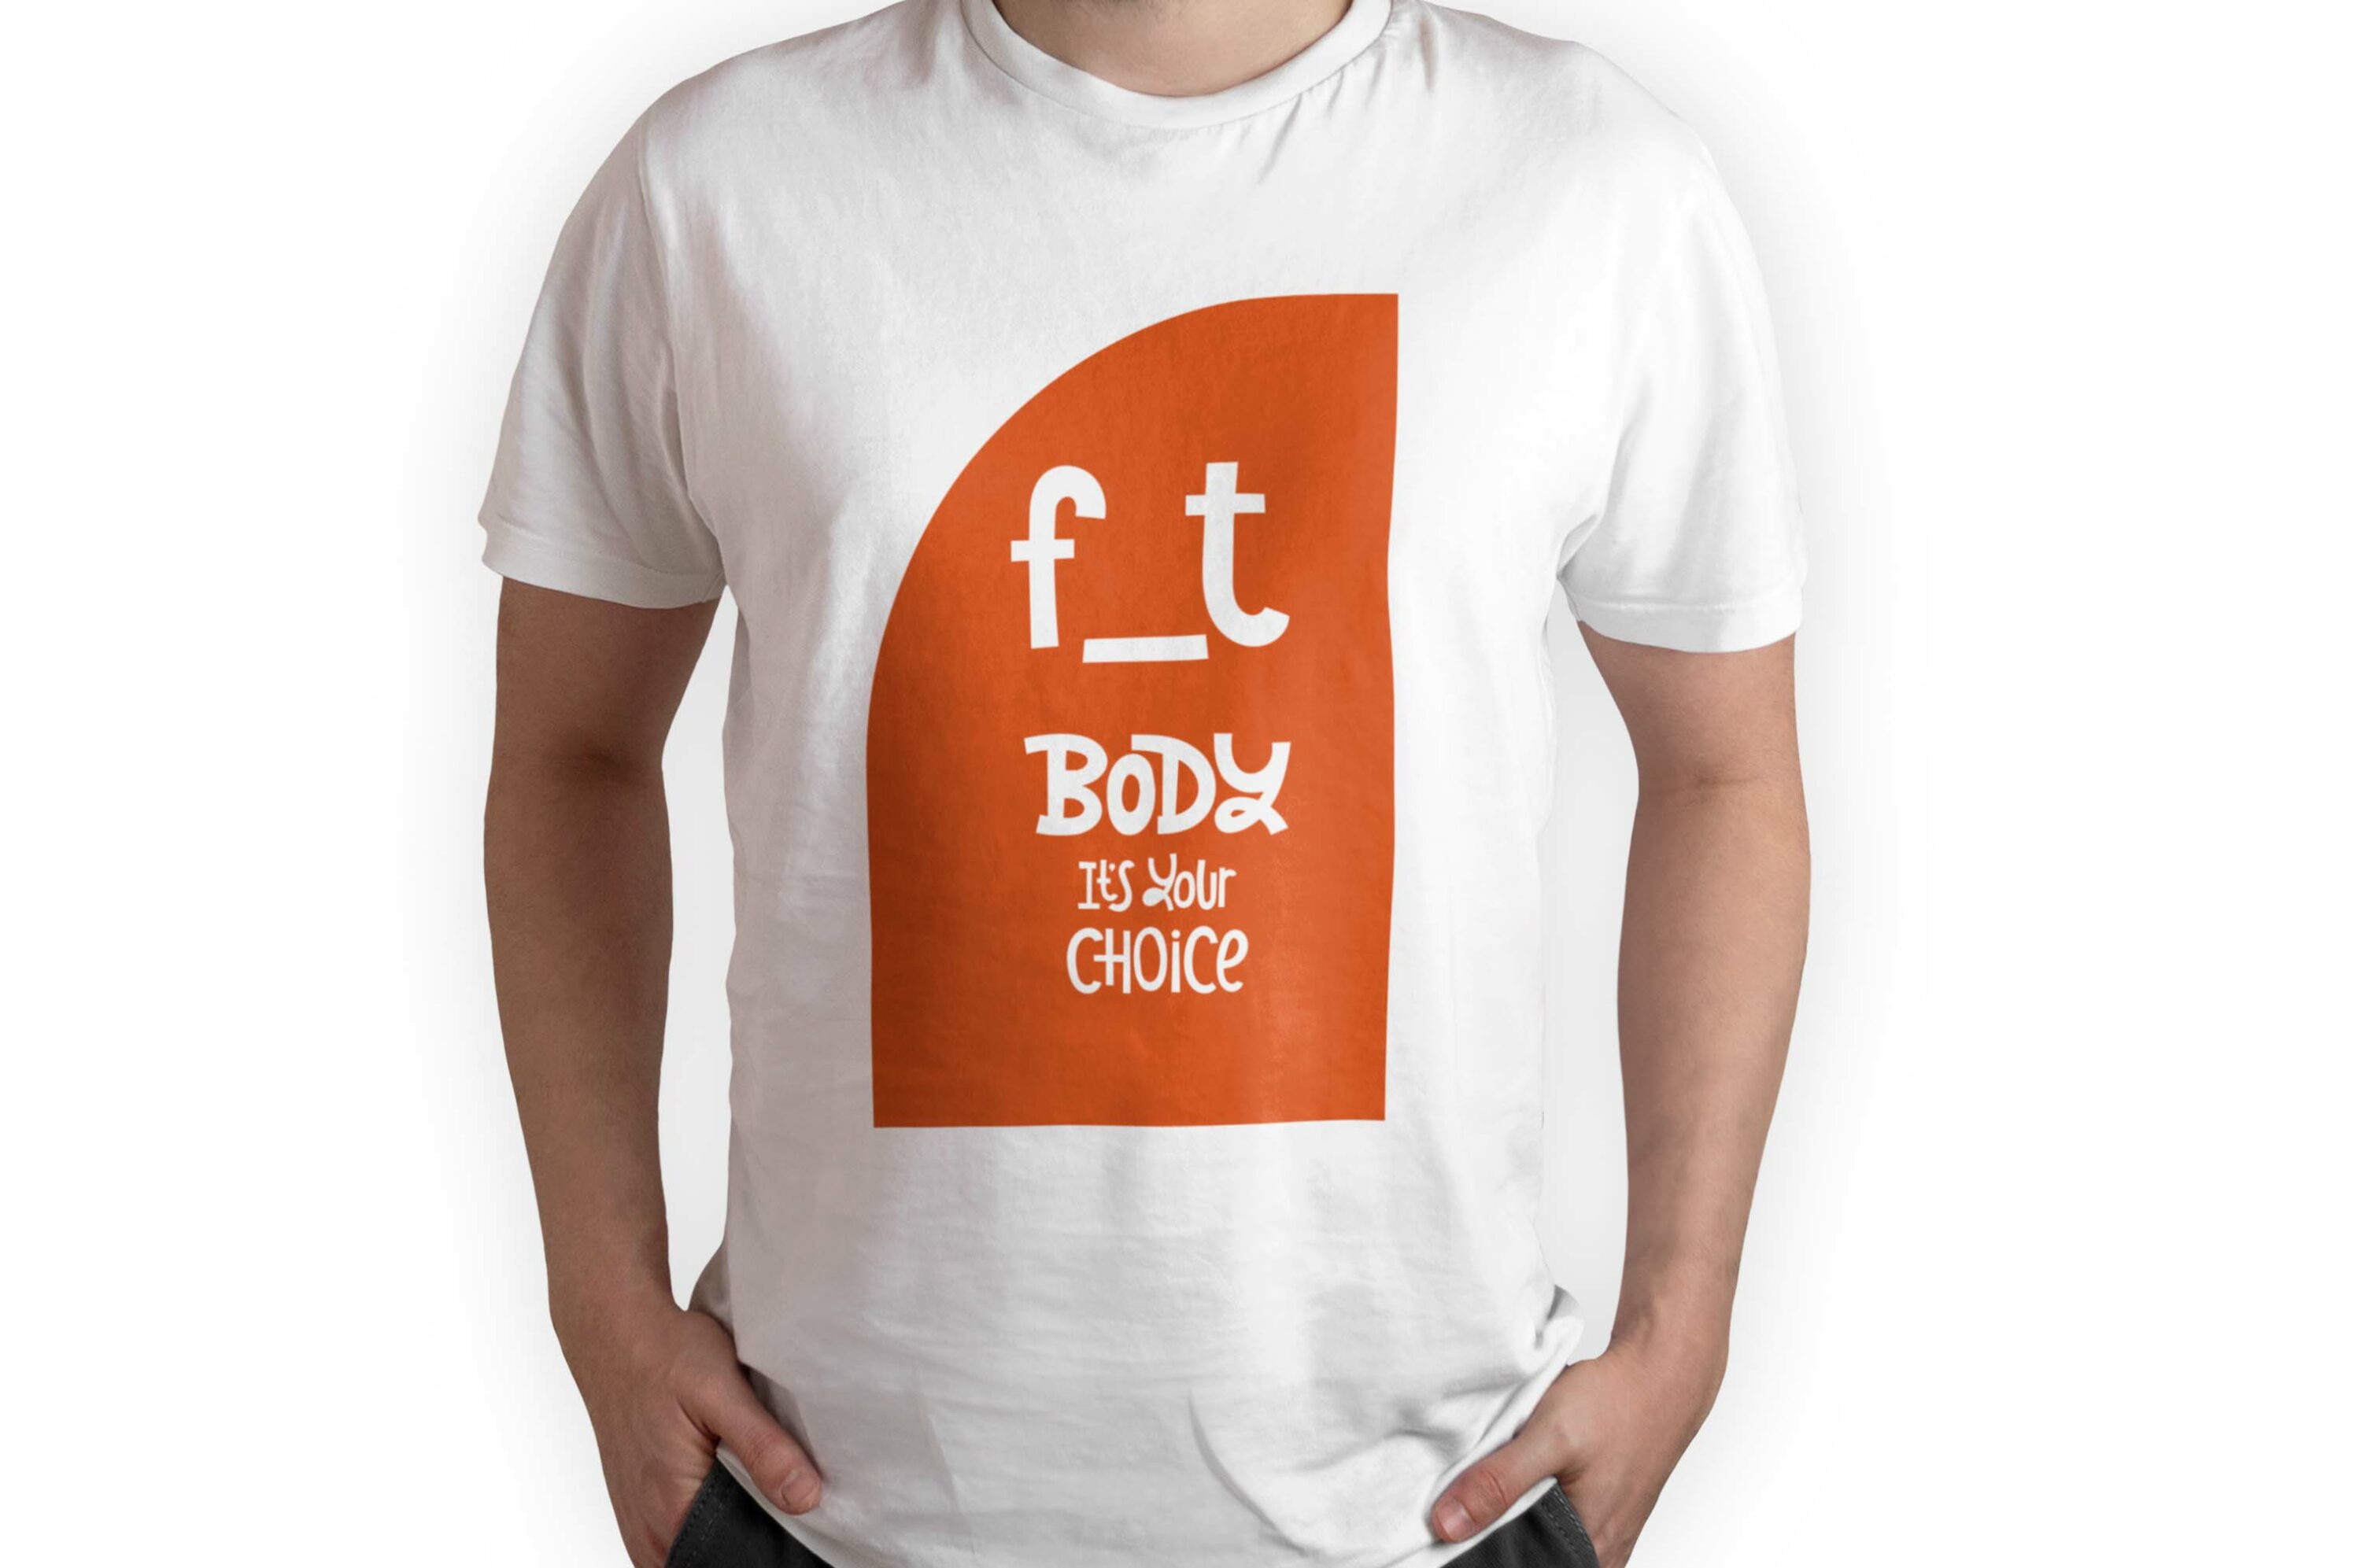 Bundle of 156 T-shirt Designs with Fitness Quotes, f_t body it's your choice in orange shape.